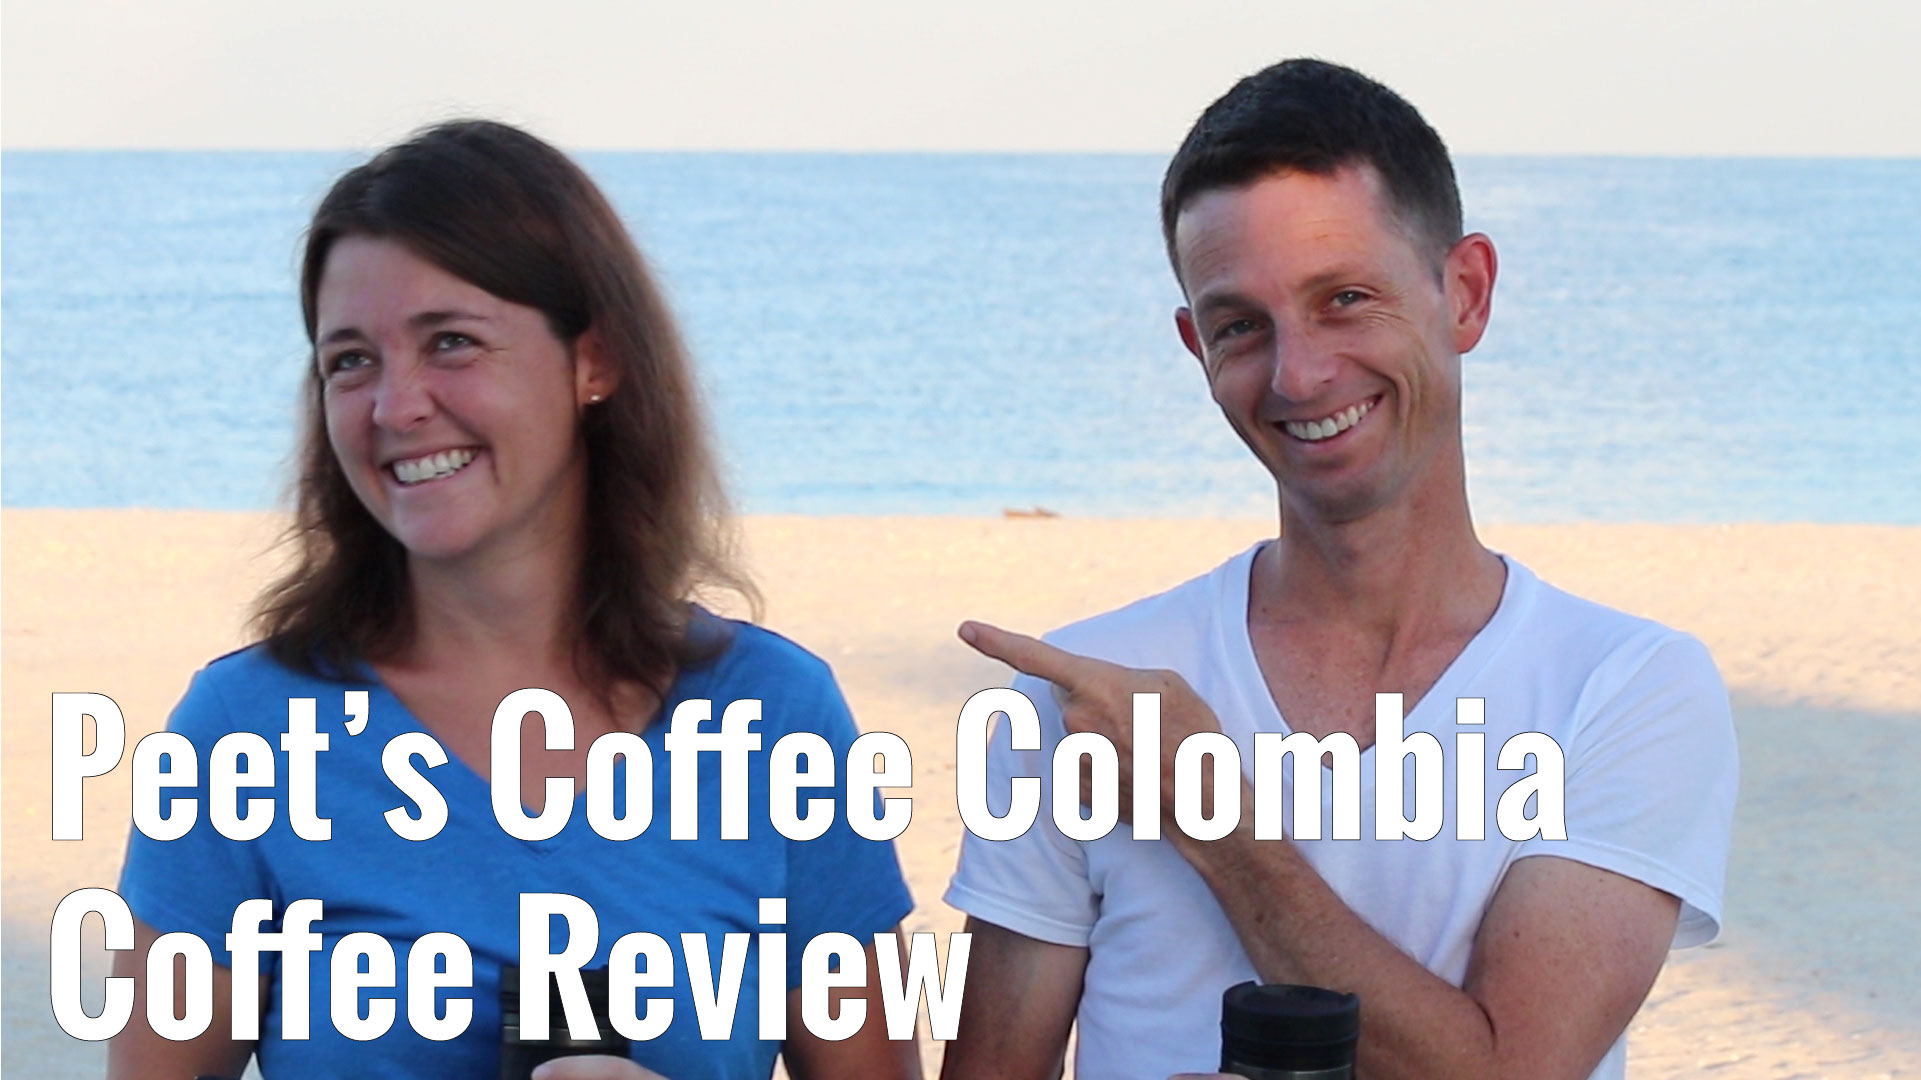 Video thumbnail for the review of Peets Colombia Coffee